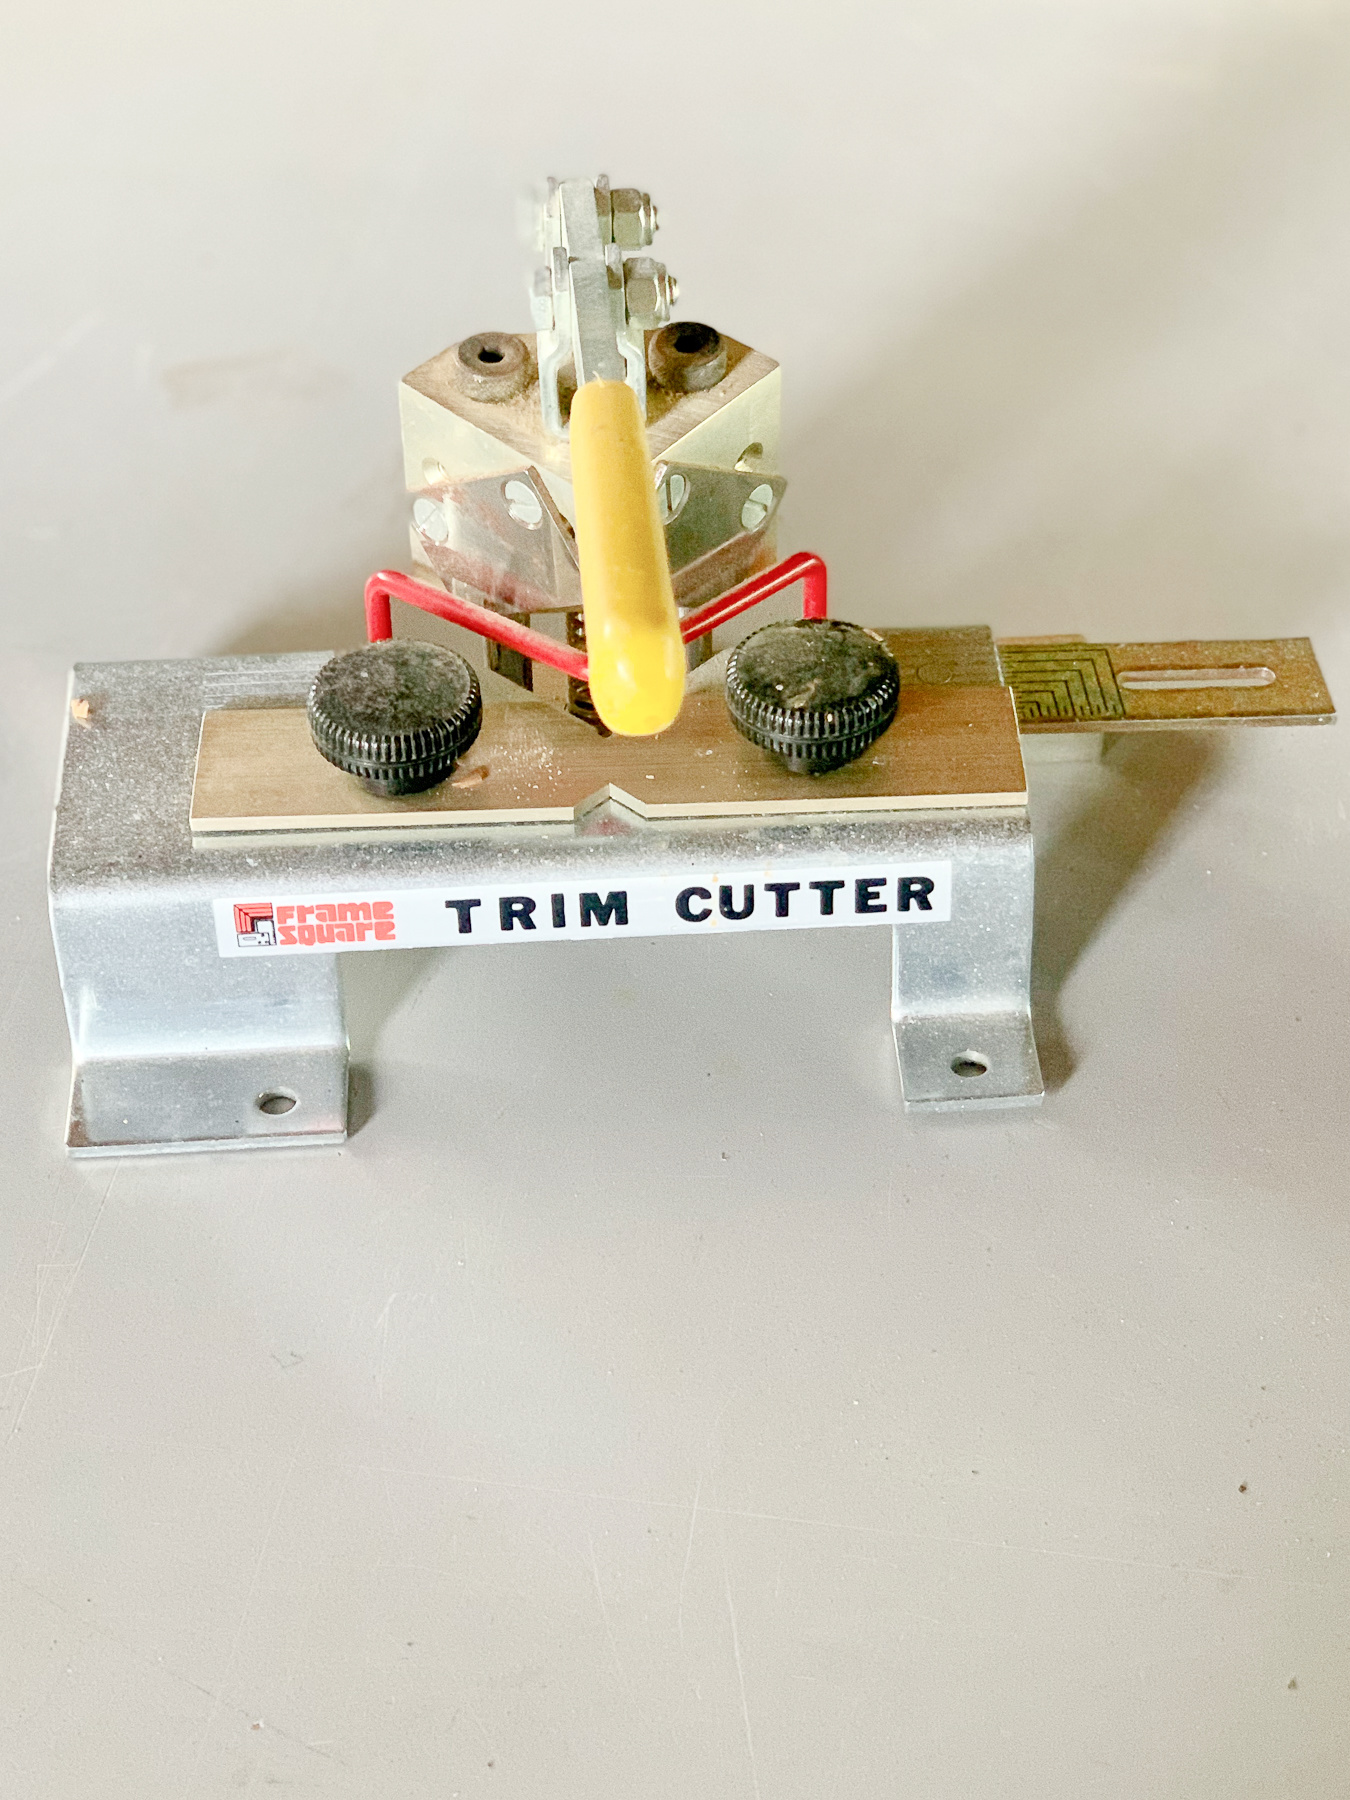 Equipment Lot: Omega Double Miter Saw, ITW AMP VN4 Vnailer, Fletcher 3000 Cutter & Supplies (Used) Item # UE-071922A (Illinois)